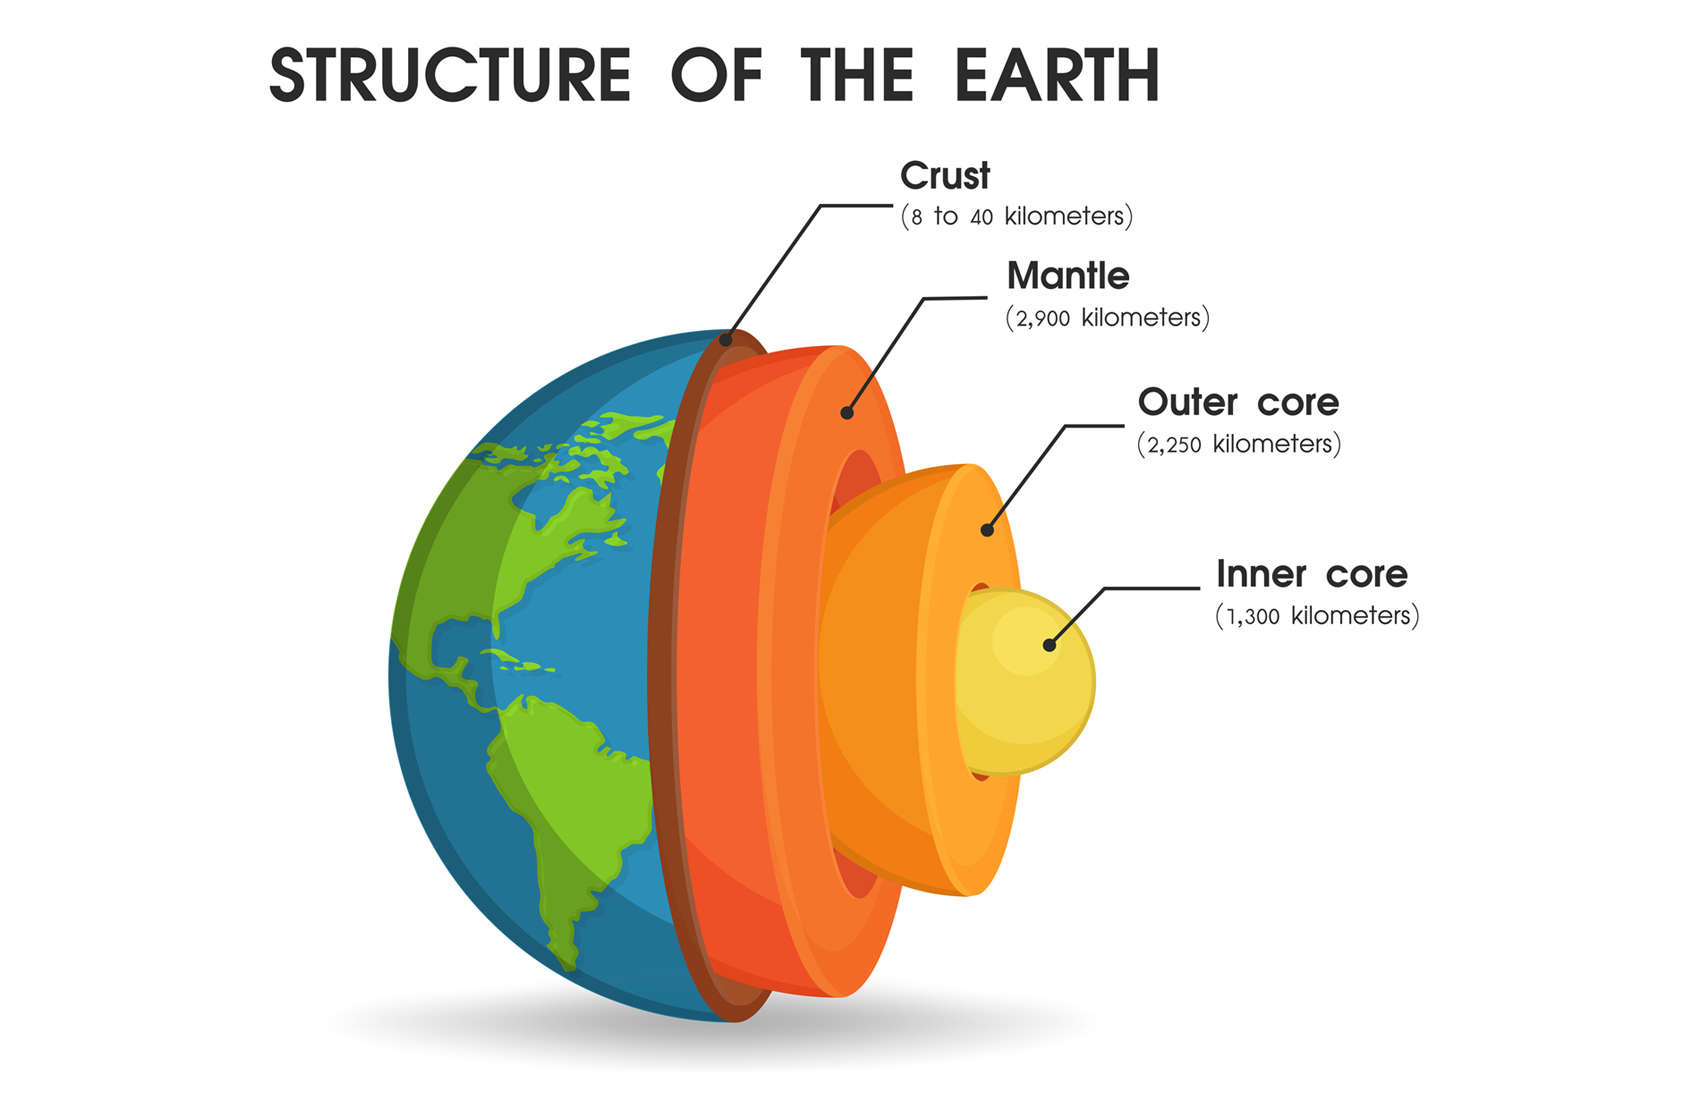 The Earth’s major layers consist of the thin rocky crust, the mantle (very hot but solid rock), the outer core (liquid iron), and the inner core (solid iron). Credit: Getty Images / anuwat meereewee